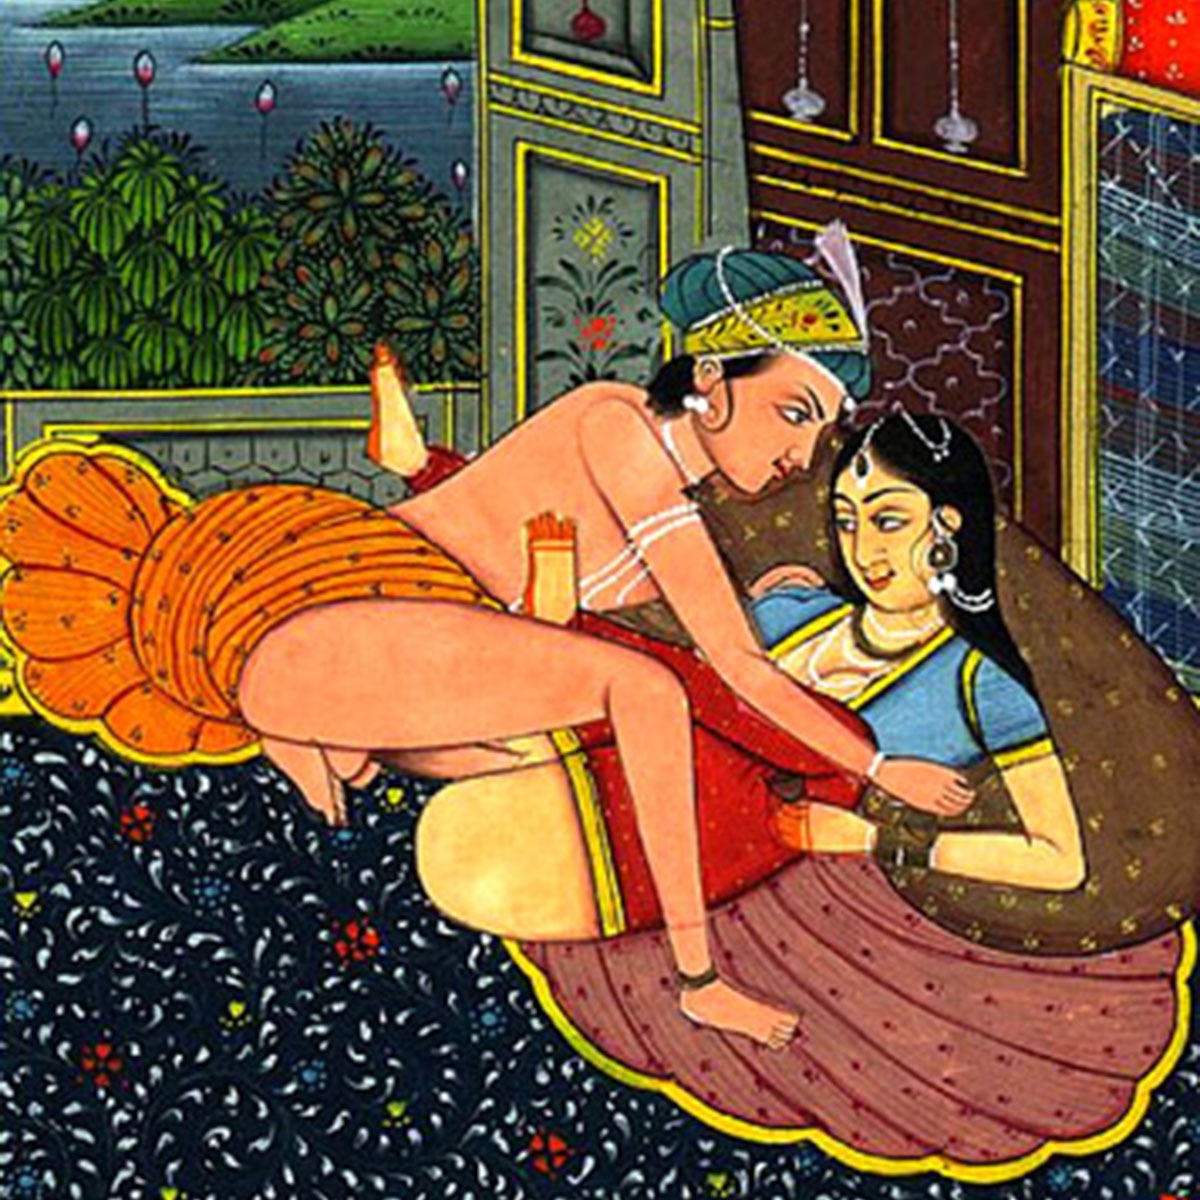 Kama sutra sex games.